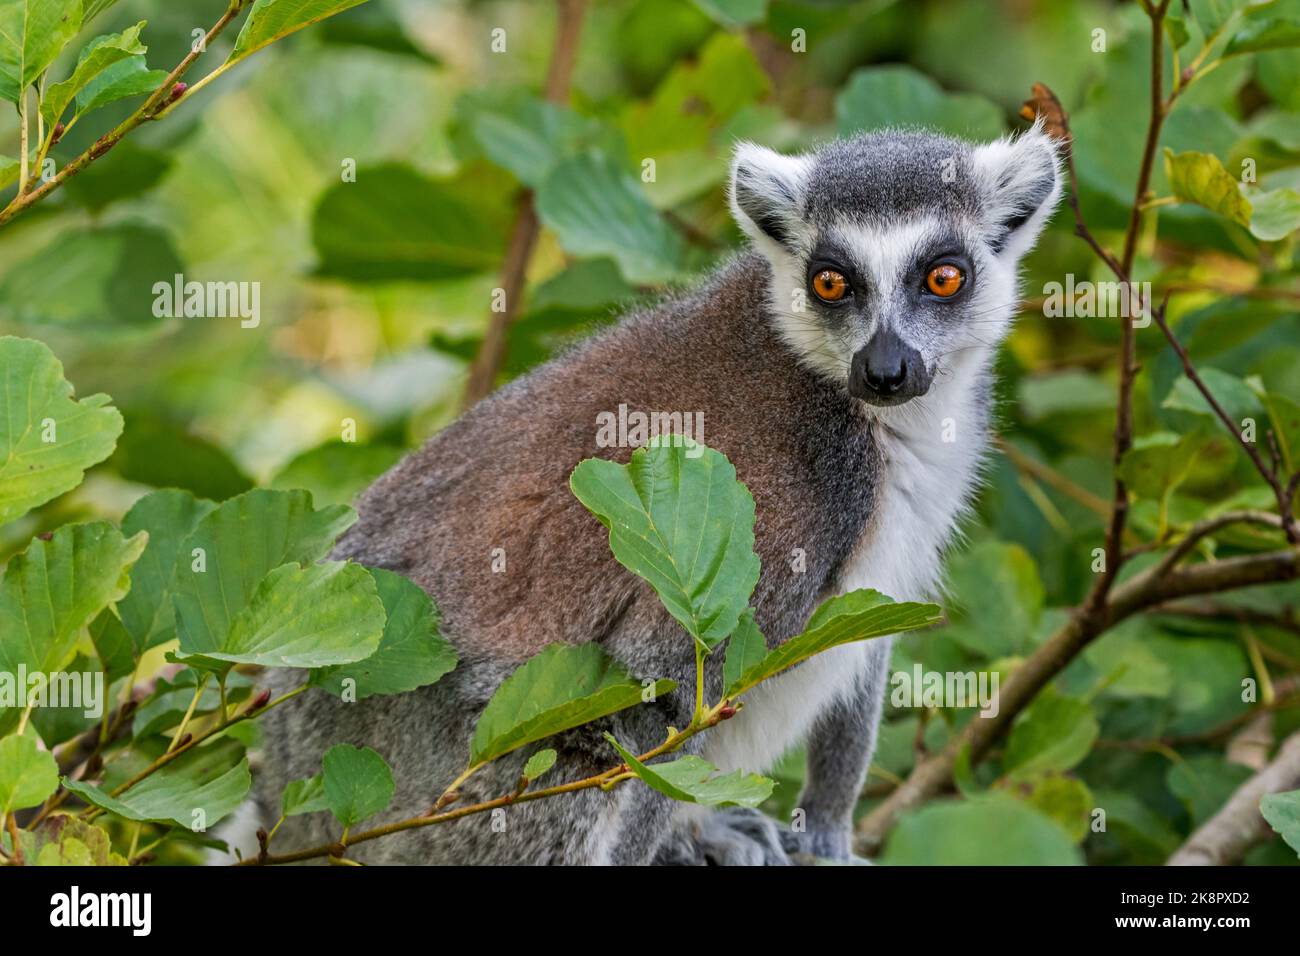 Ring-tailed lemur (Lemur catta) in tree, endangered primate endemic to the island of Madagascar, Africa Stock Photo